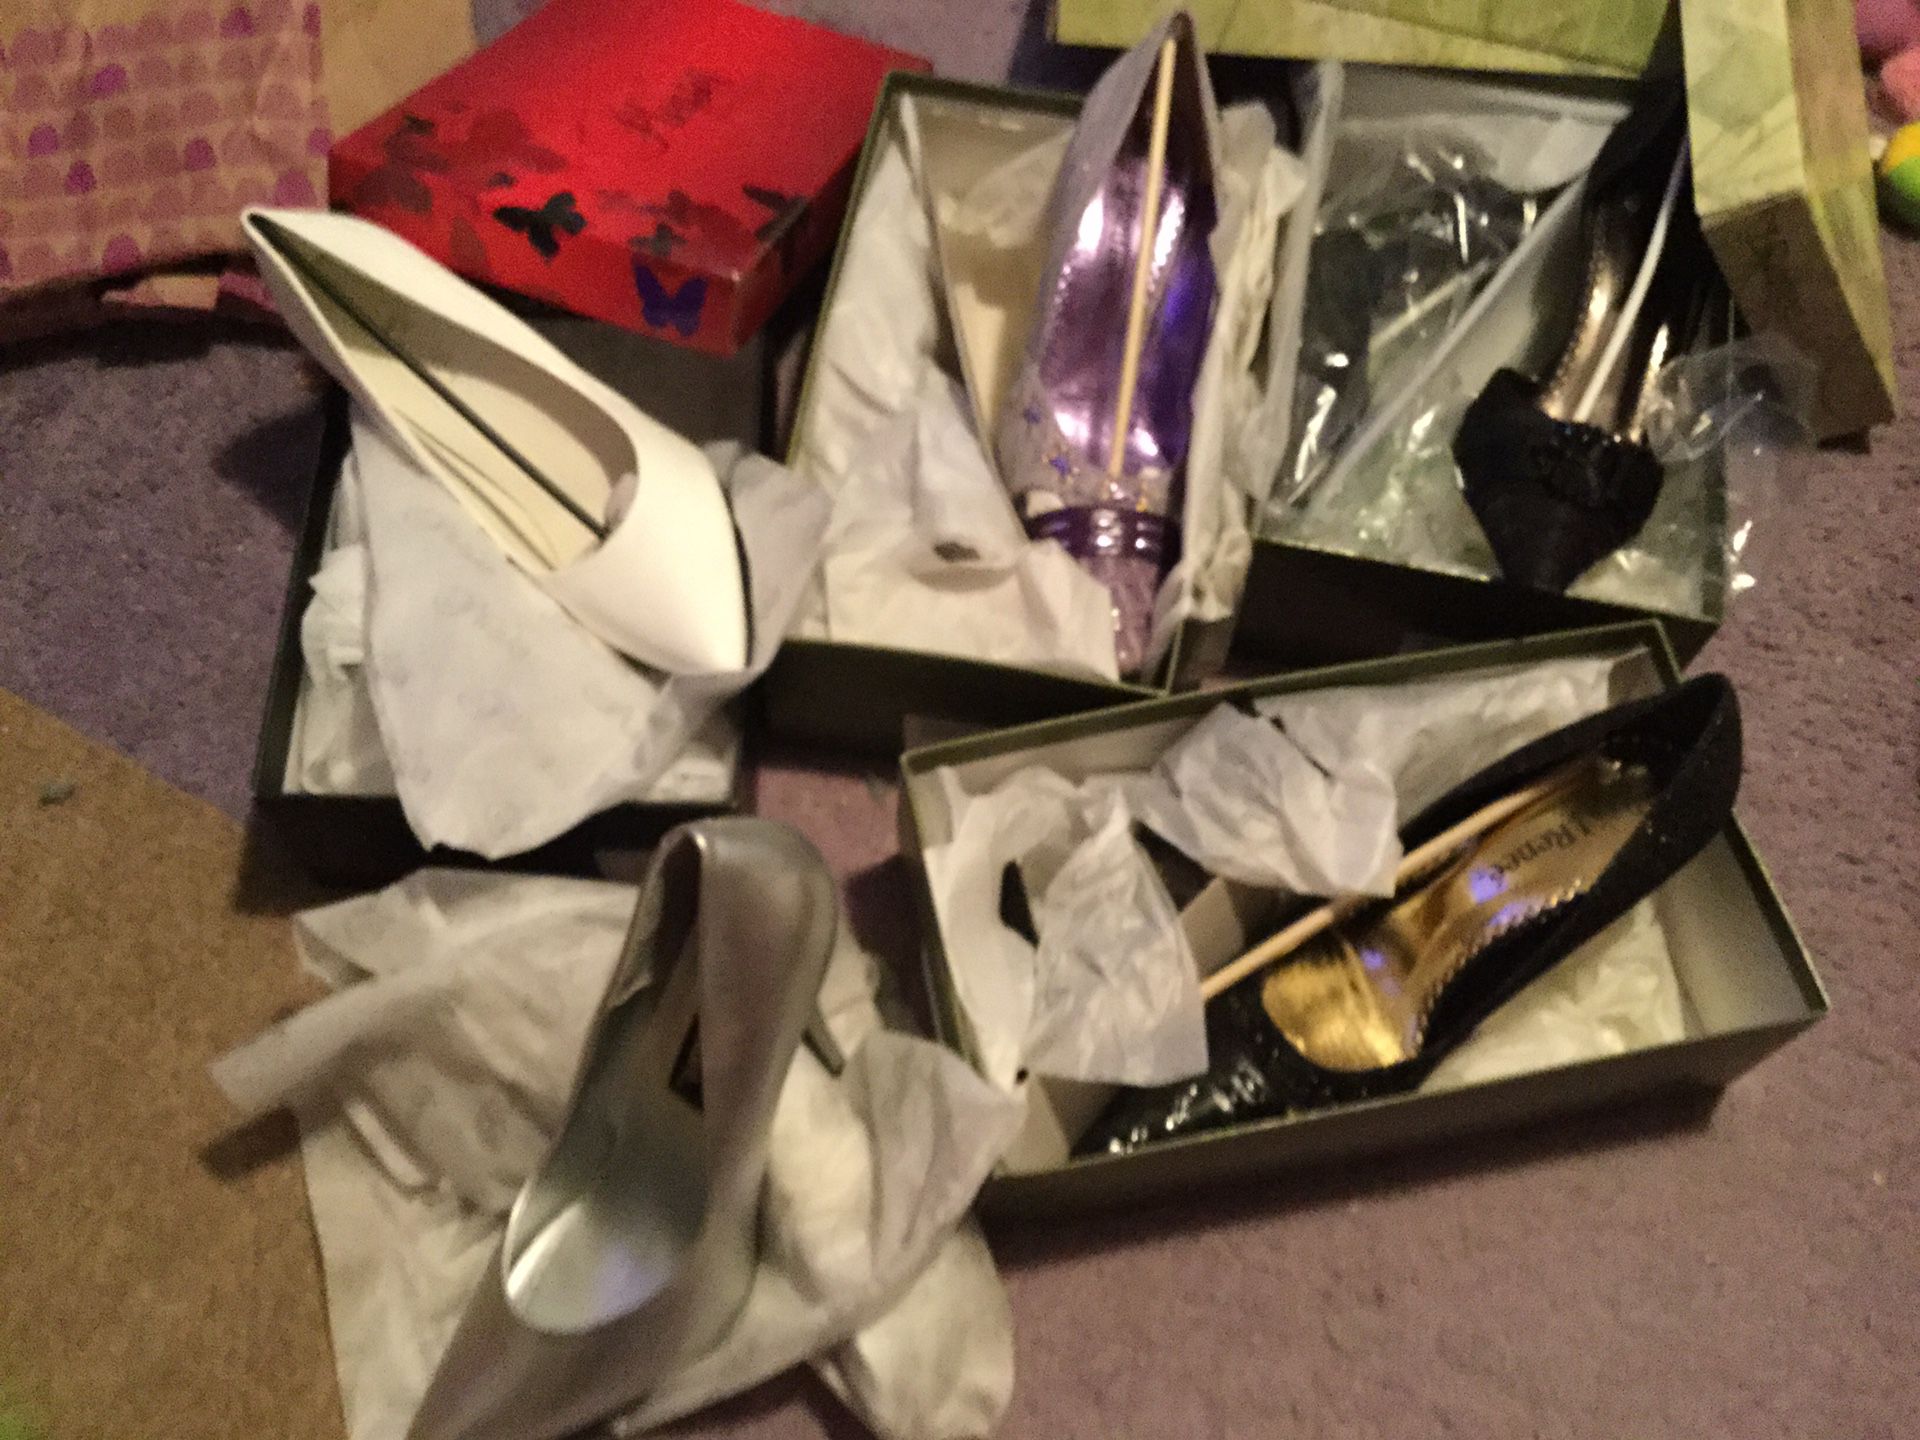 5 PAIRS WOMENS SIZE 12, 4”-5” heels WILL SELL INDIVIDUAL PAIRS FOR $15 each